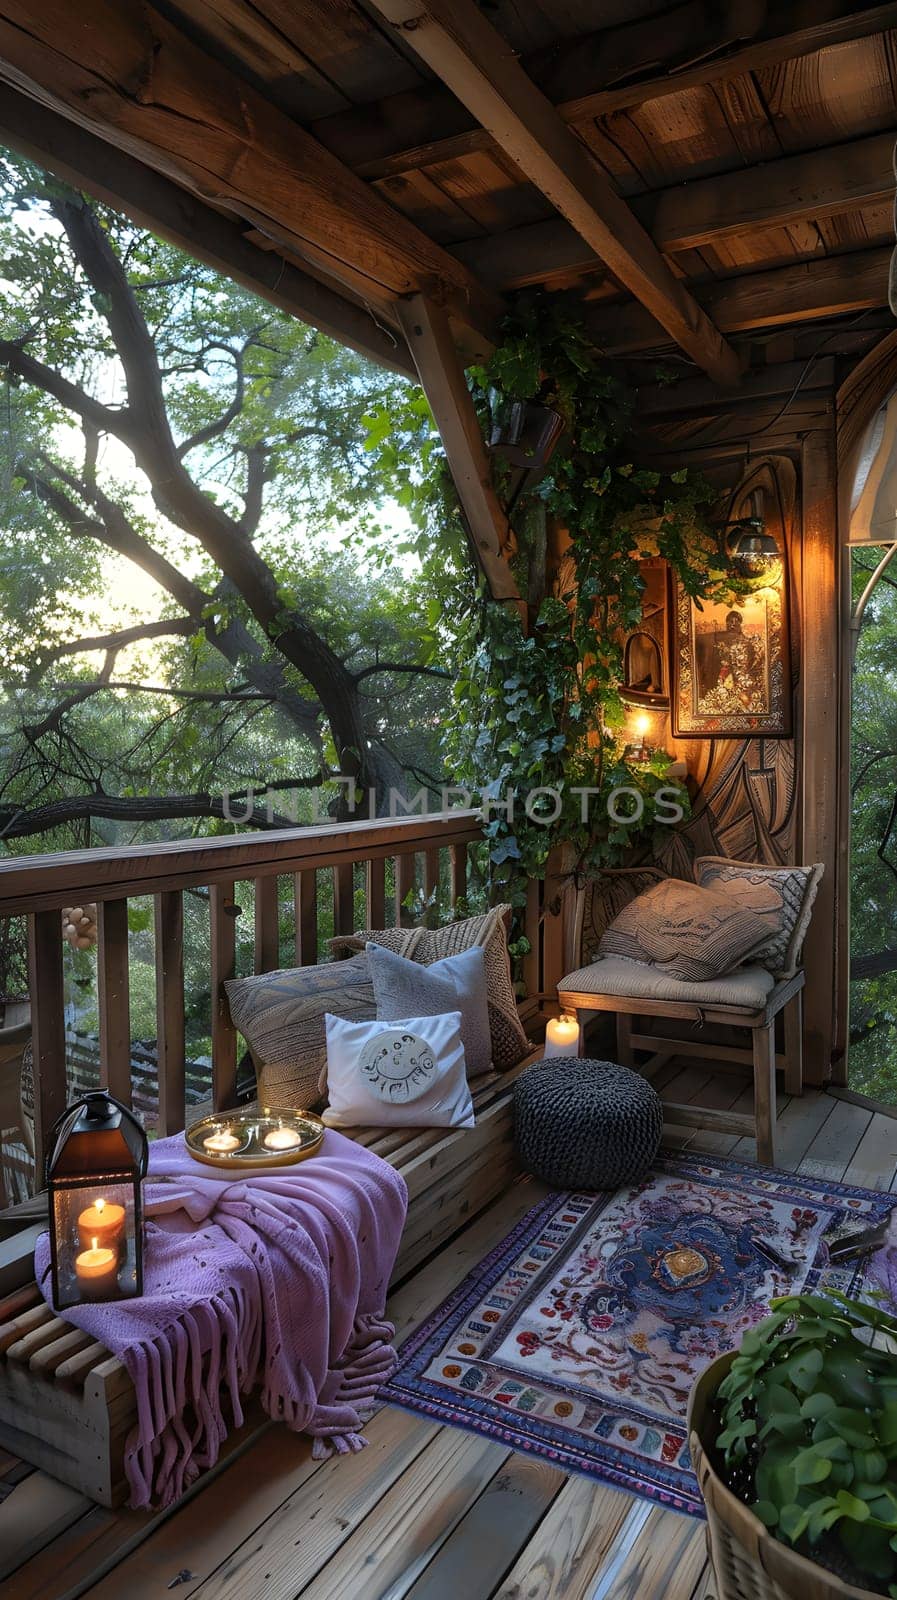 A balcony with a cozy couch, chairs, a rug, and a lantern, surrounded by potted plants and a tree, creating a beautiful natural landscape in the interior design of the building